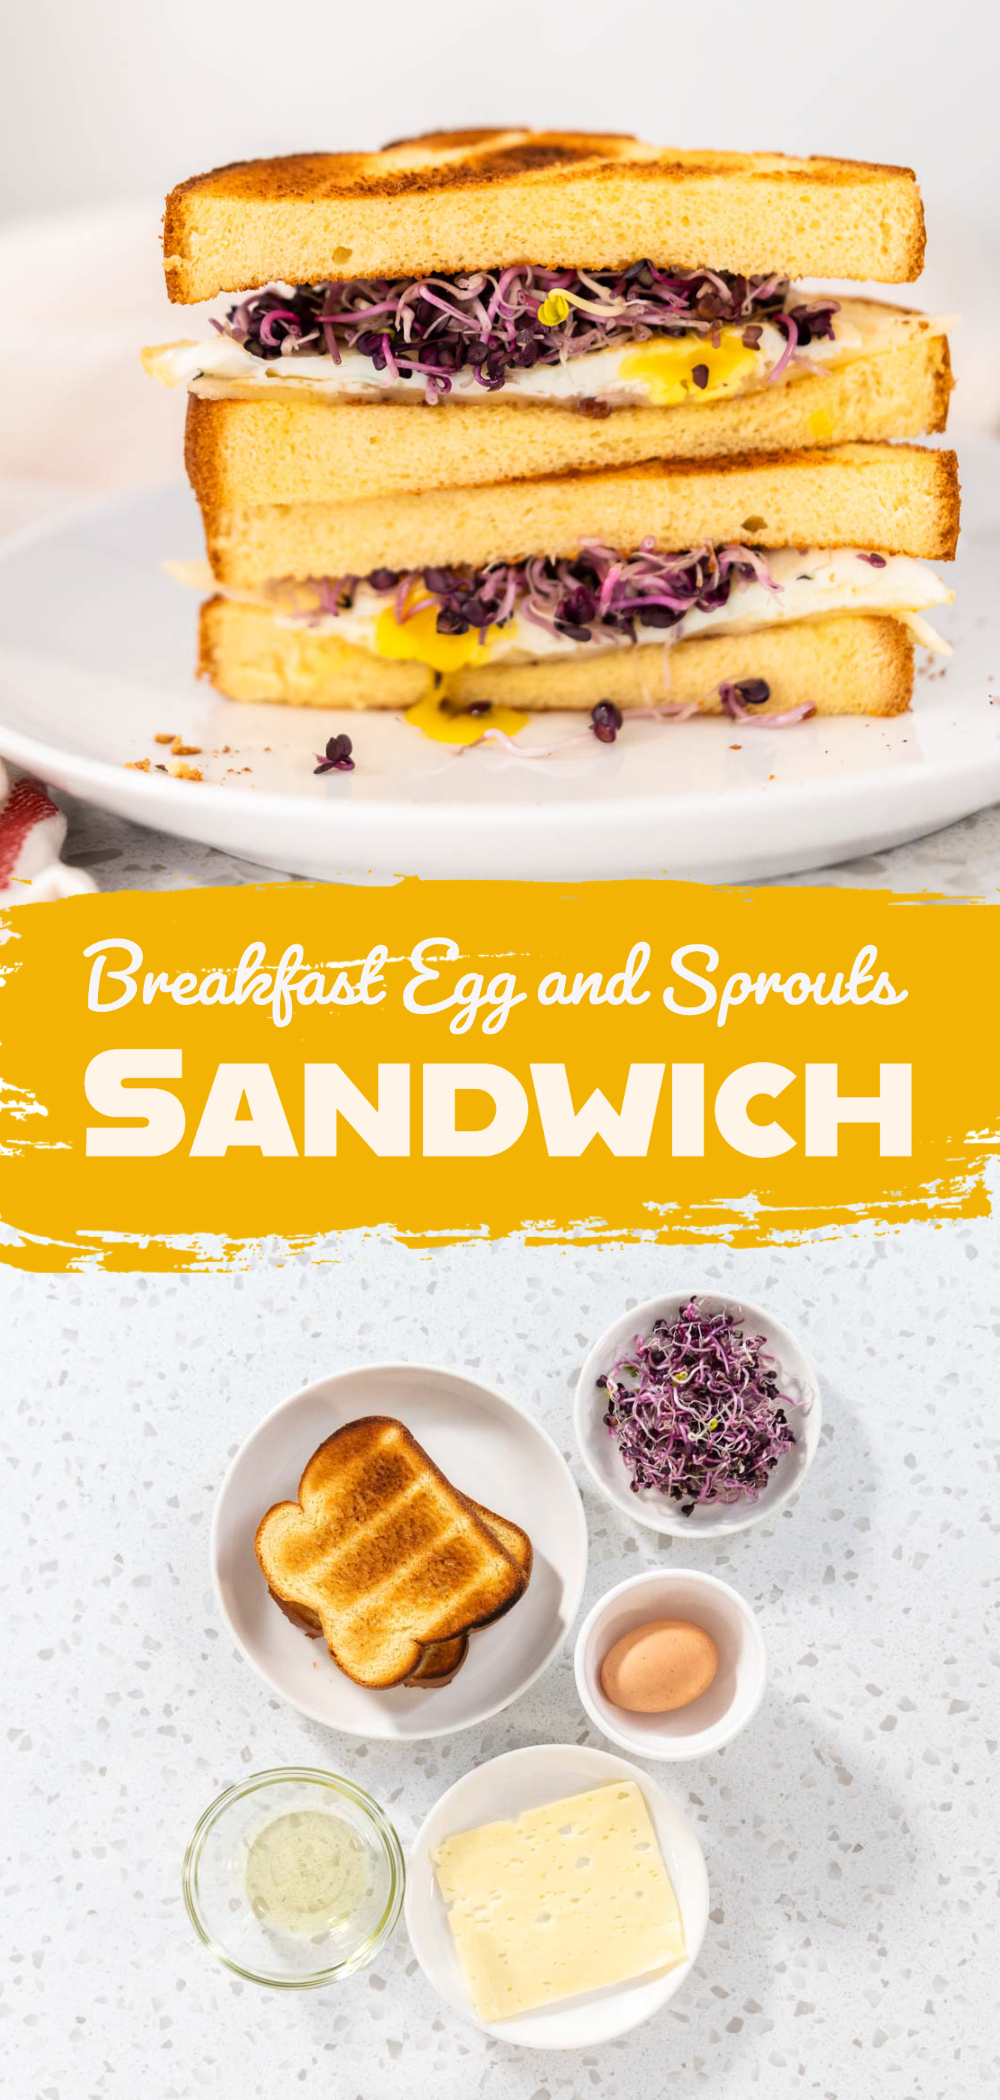 Breakfast Egg and Sprouts Sandwich